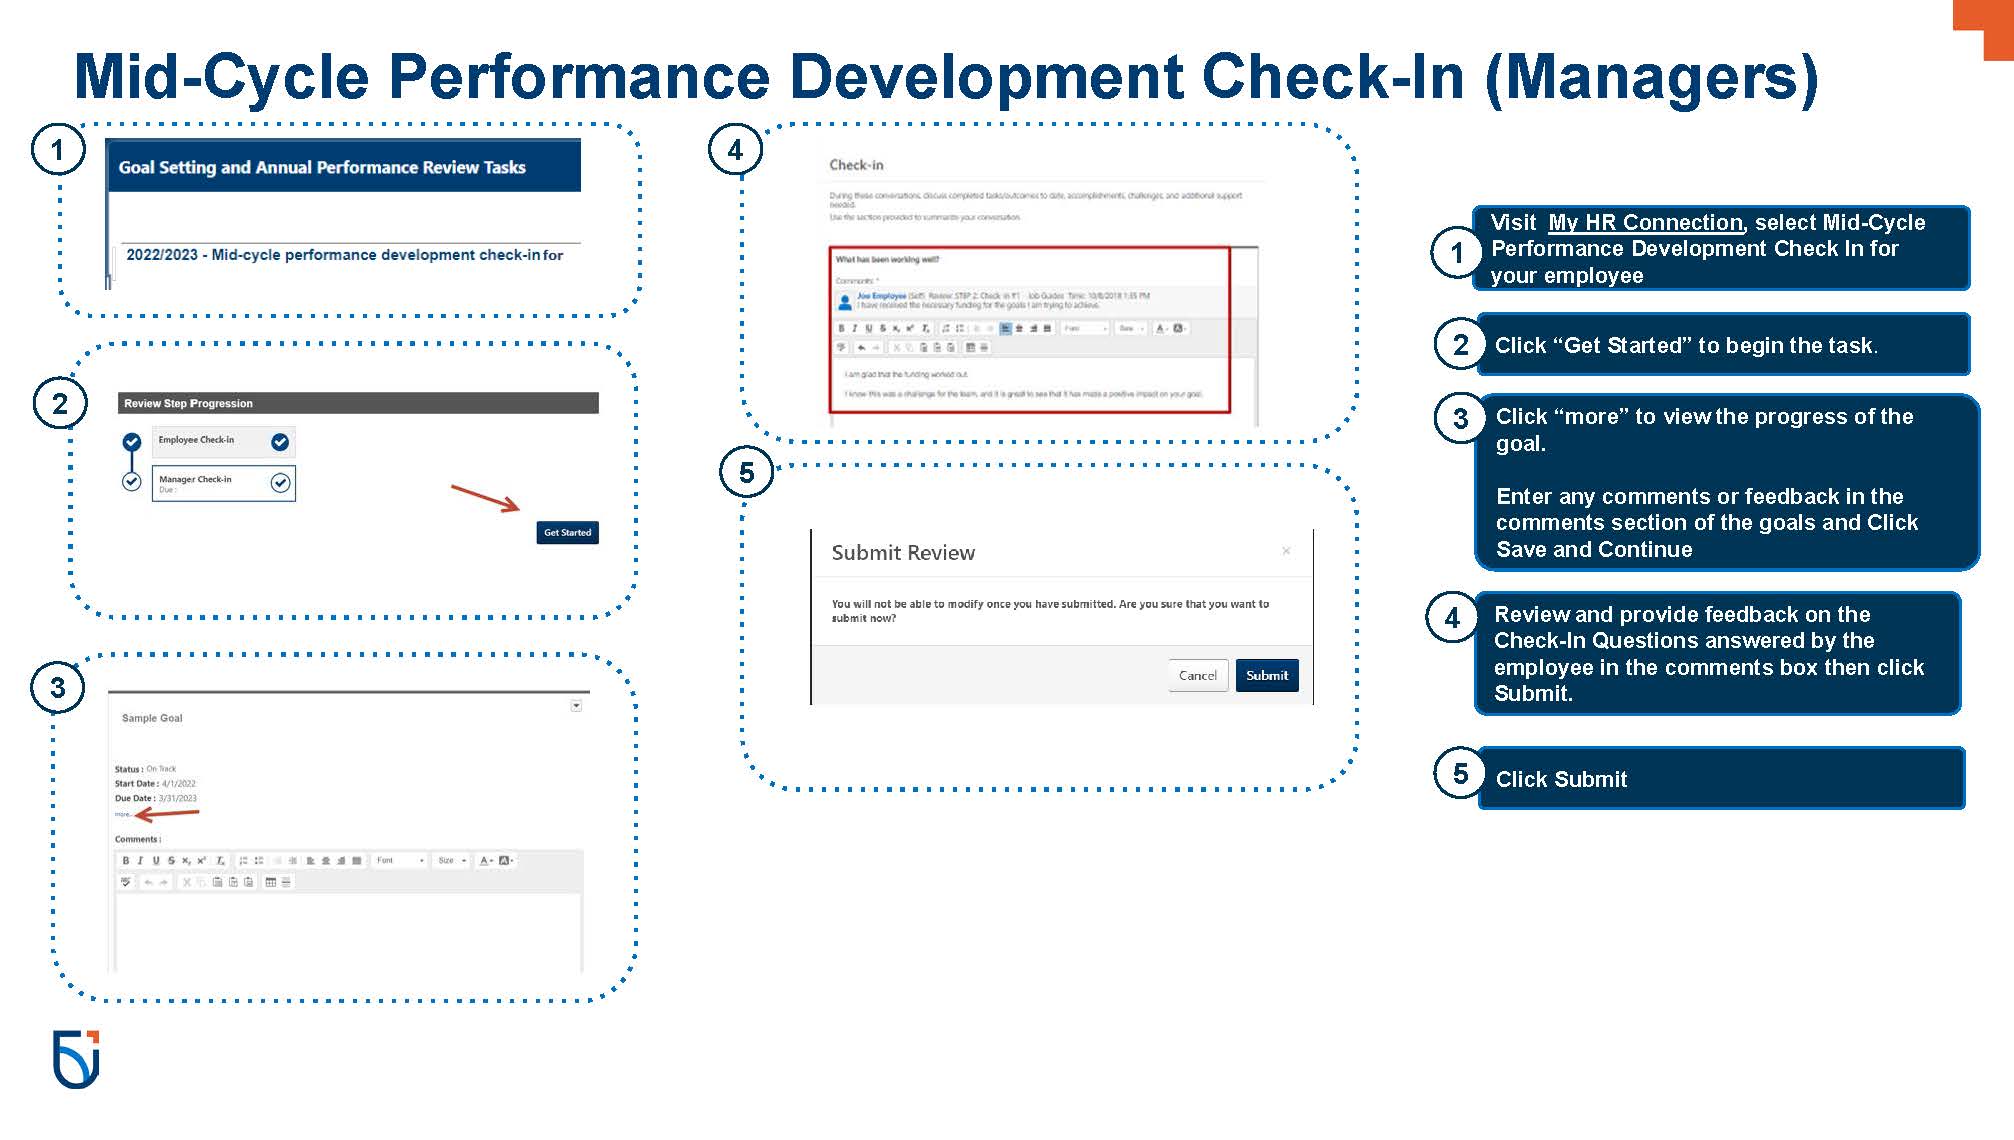 Managers - Mid-Cycle Performance Development Check-In